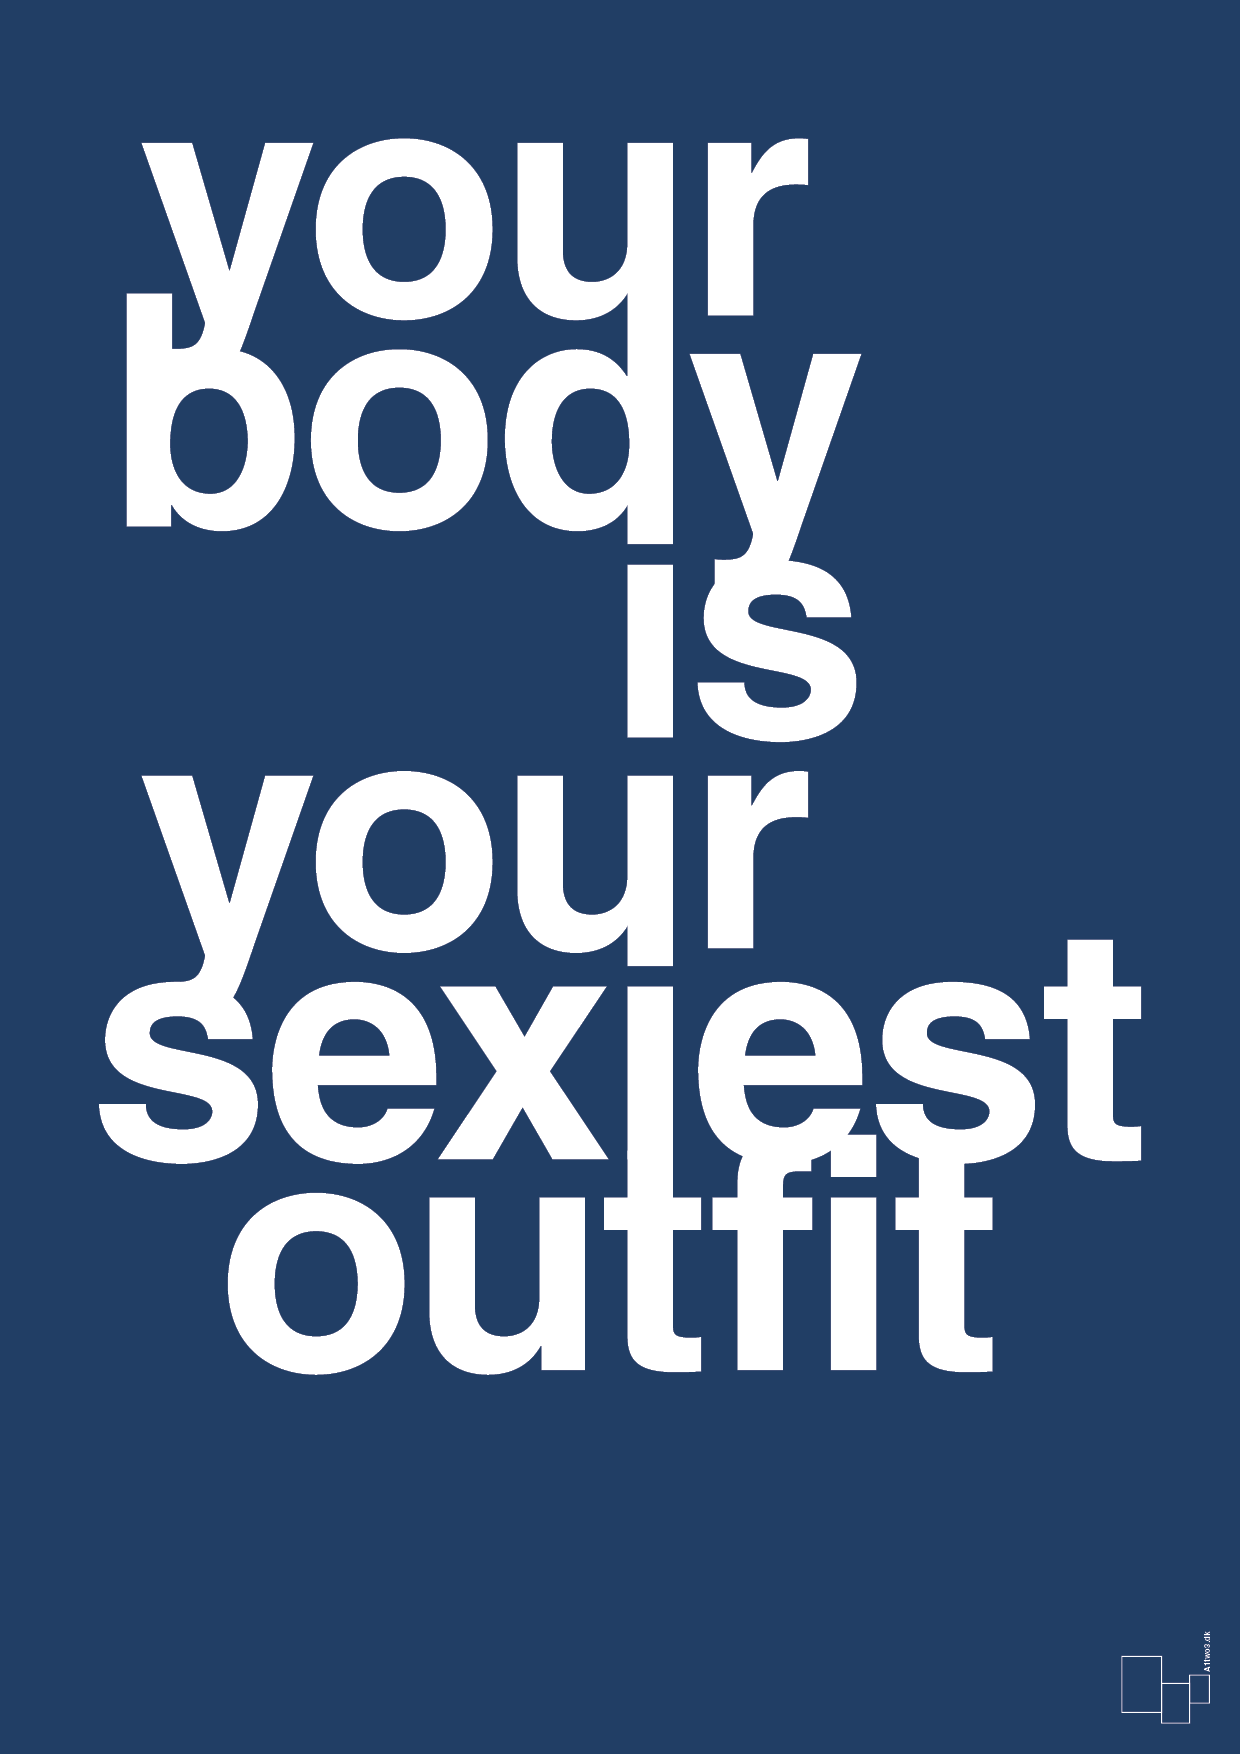 your body is your sexiest outfit - Plakat med Sport & Fritid i Lapis Blue